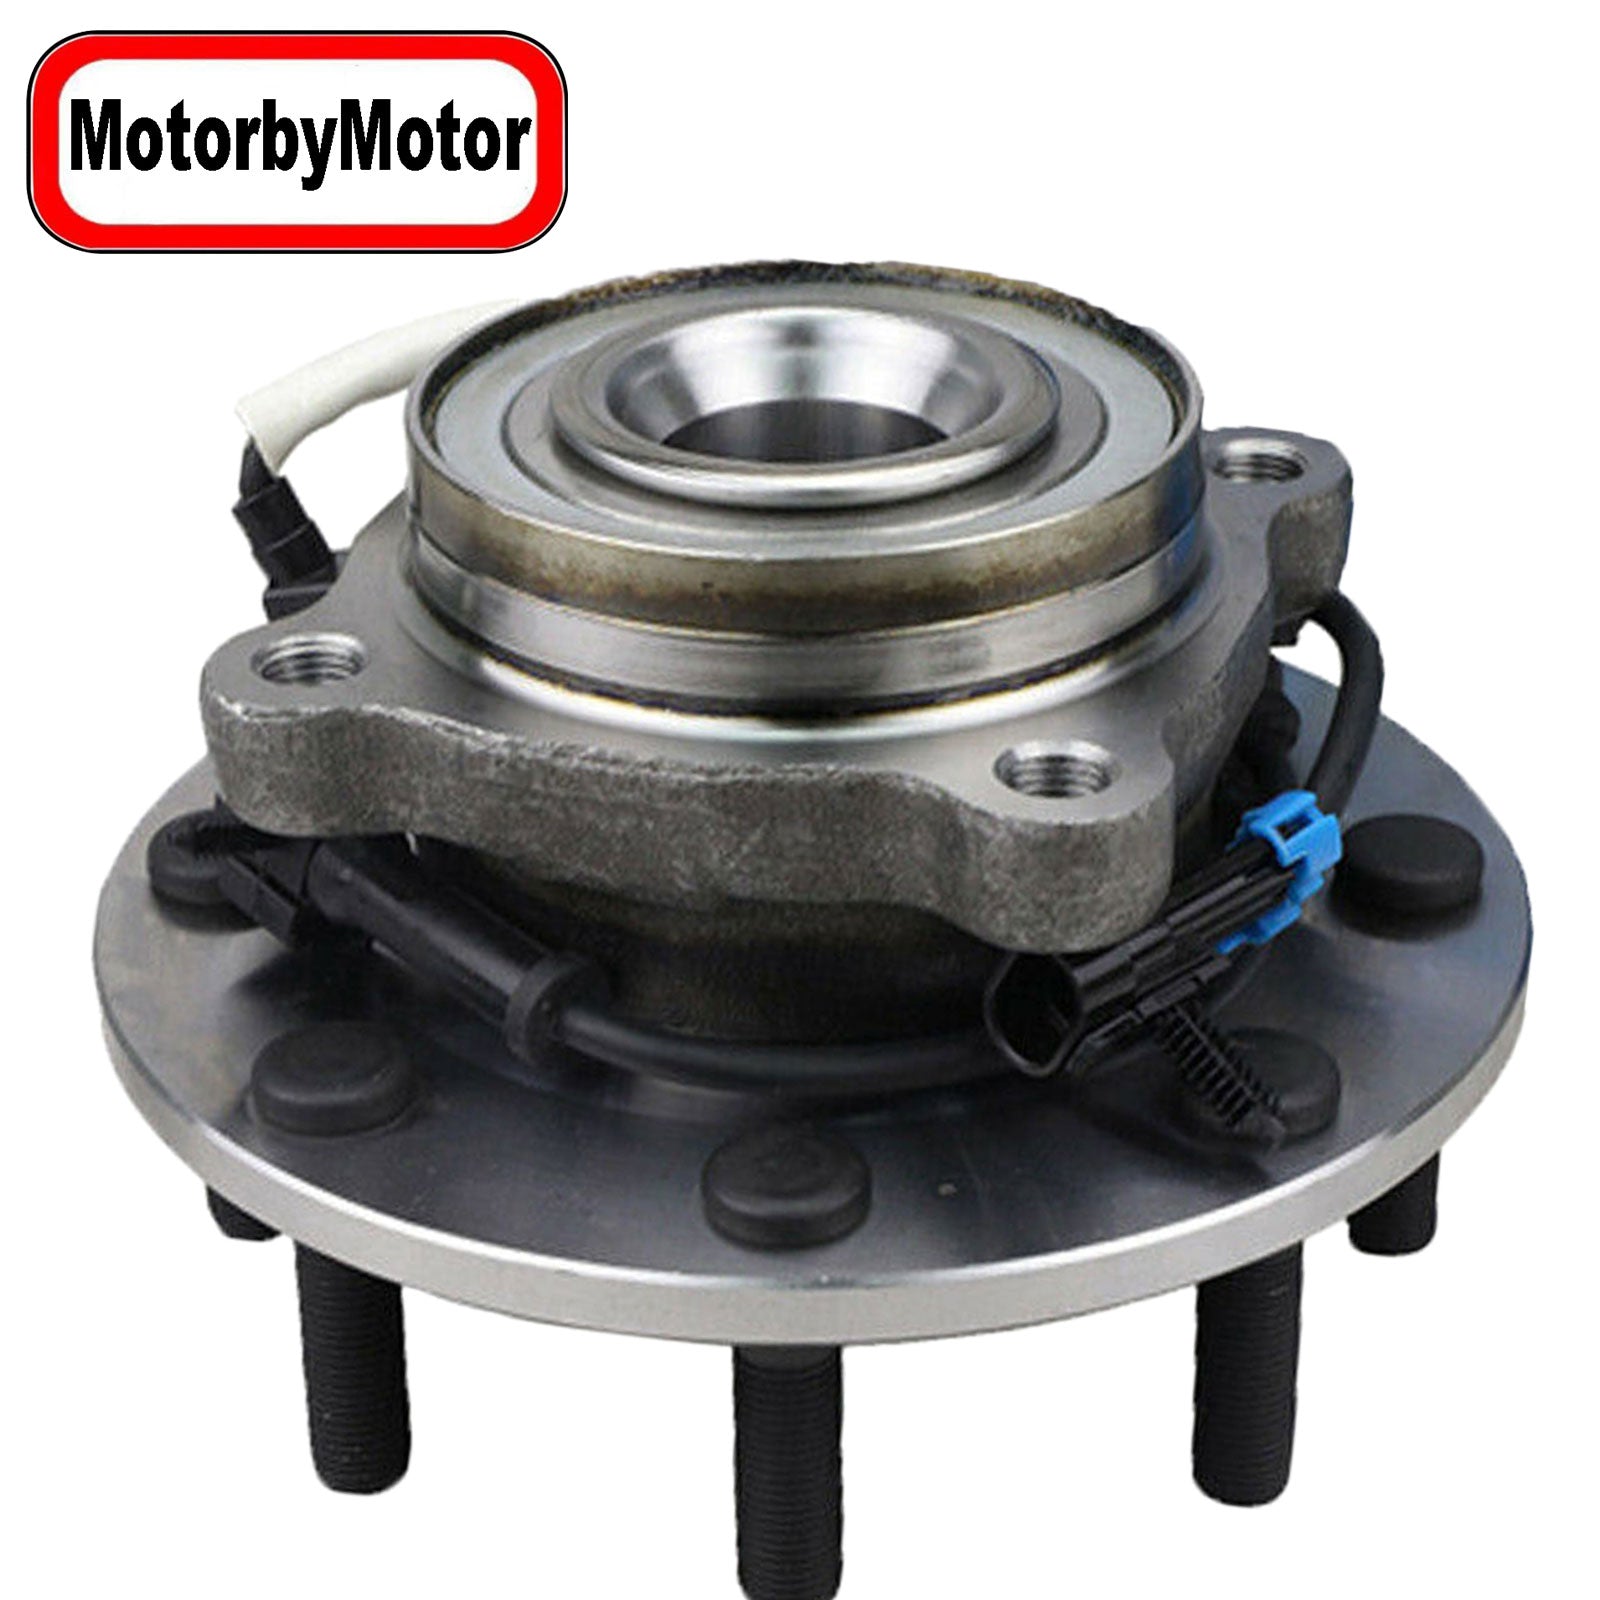 MotorbyMotor 515099 Front Wheel Bearing and Hub Assembly with 8 Lugs Fits for Chevy Silverado 3500, GMC Sierra 3500 Low-Runout OE Directly Replacement Hub Bearing (w/ABS) MotorbyMotor